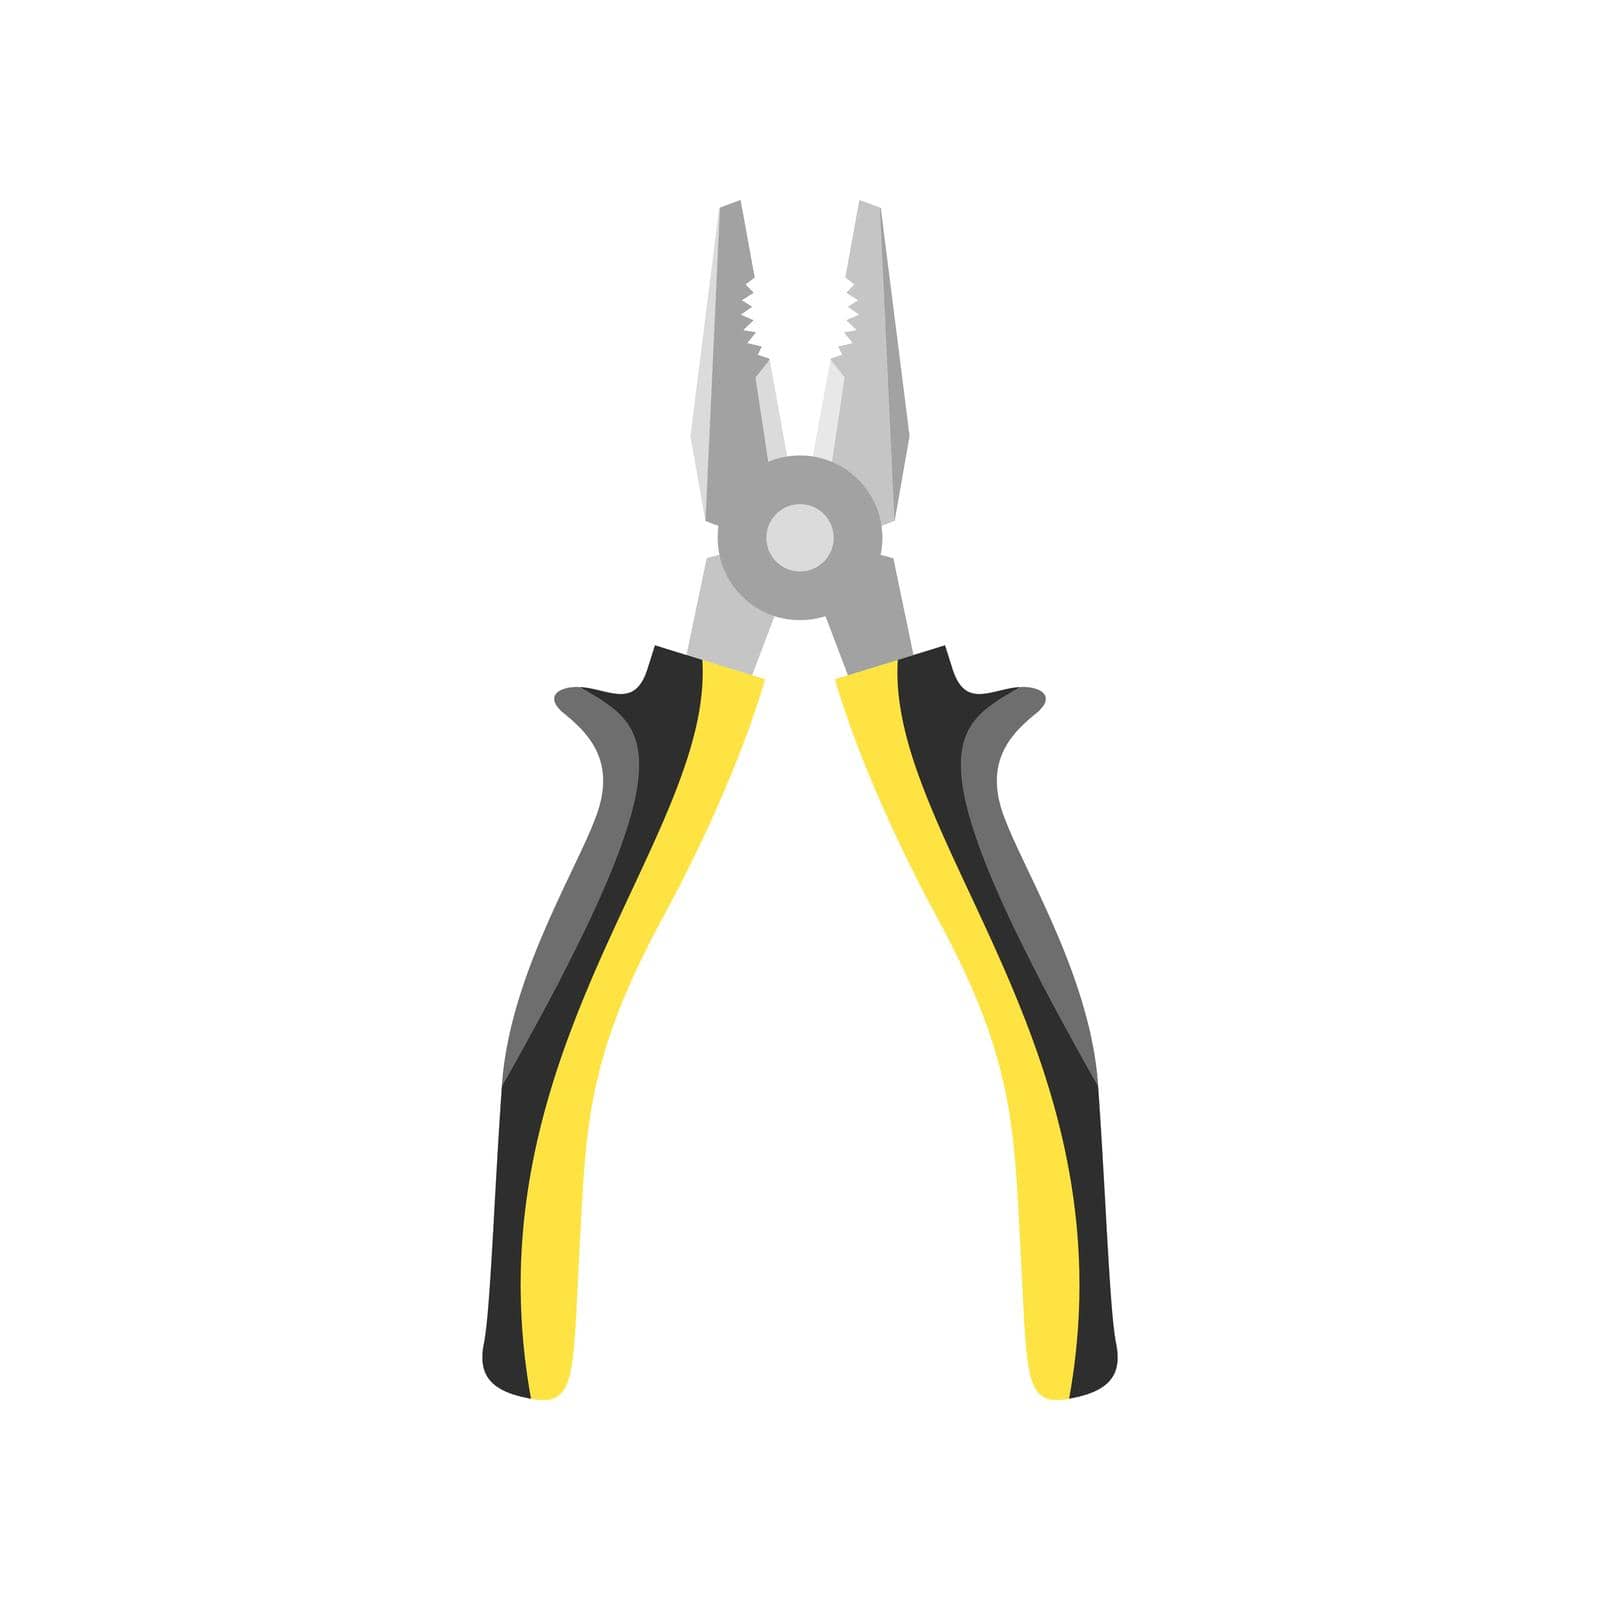 Pliers icon. Hand tool icon. Vector illustration. Color pliers icon on white background